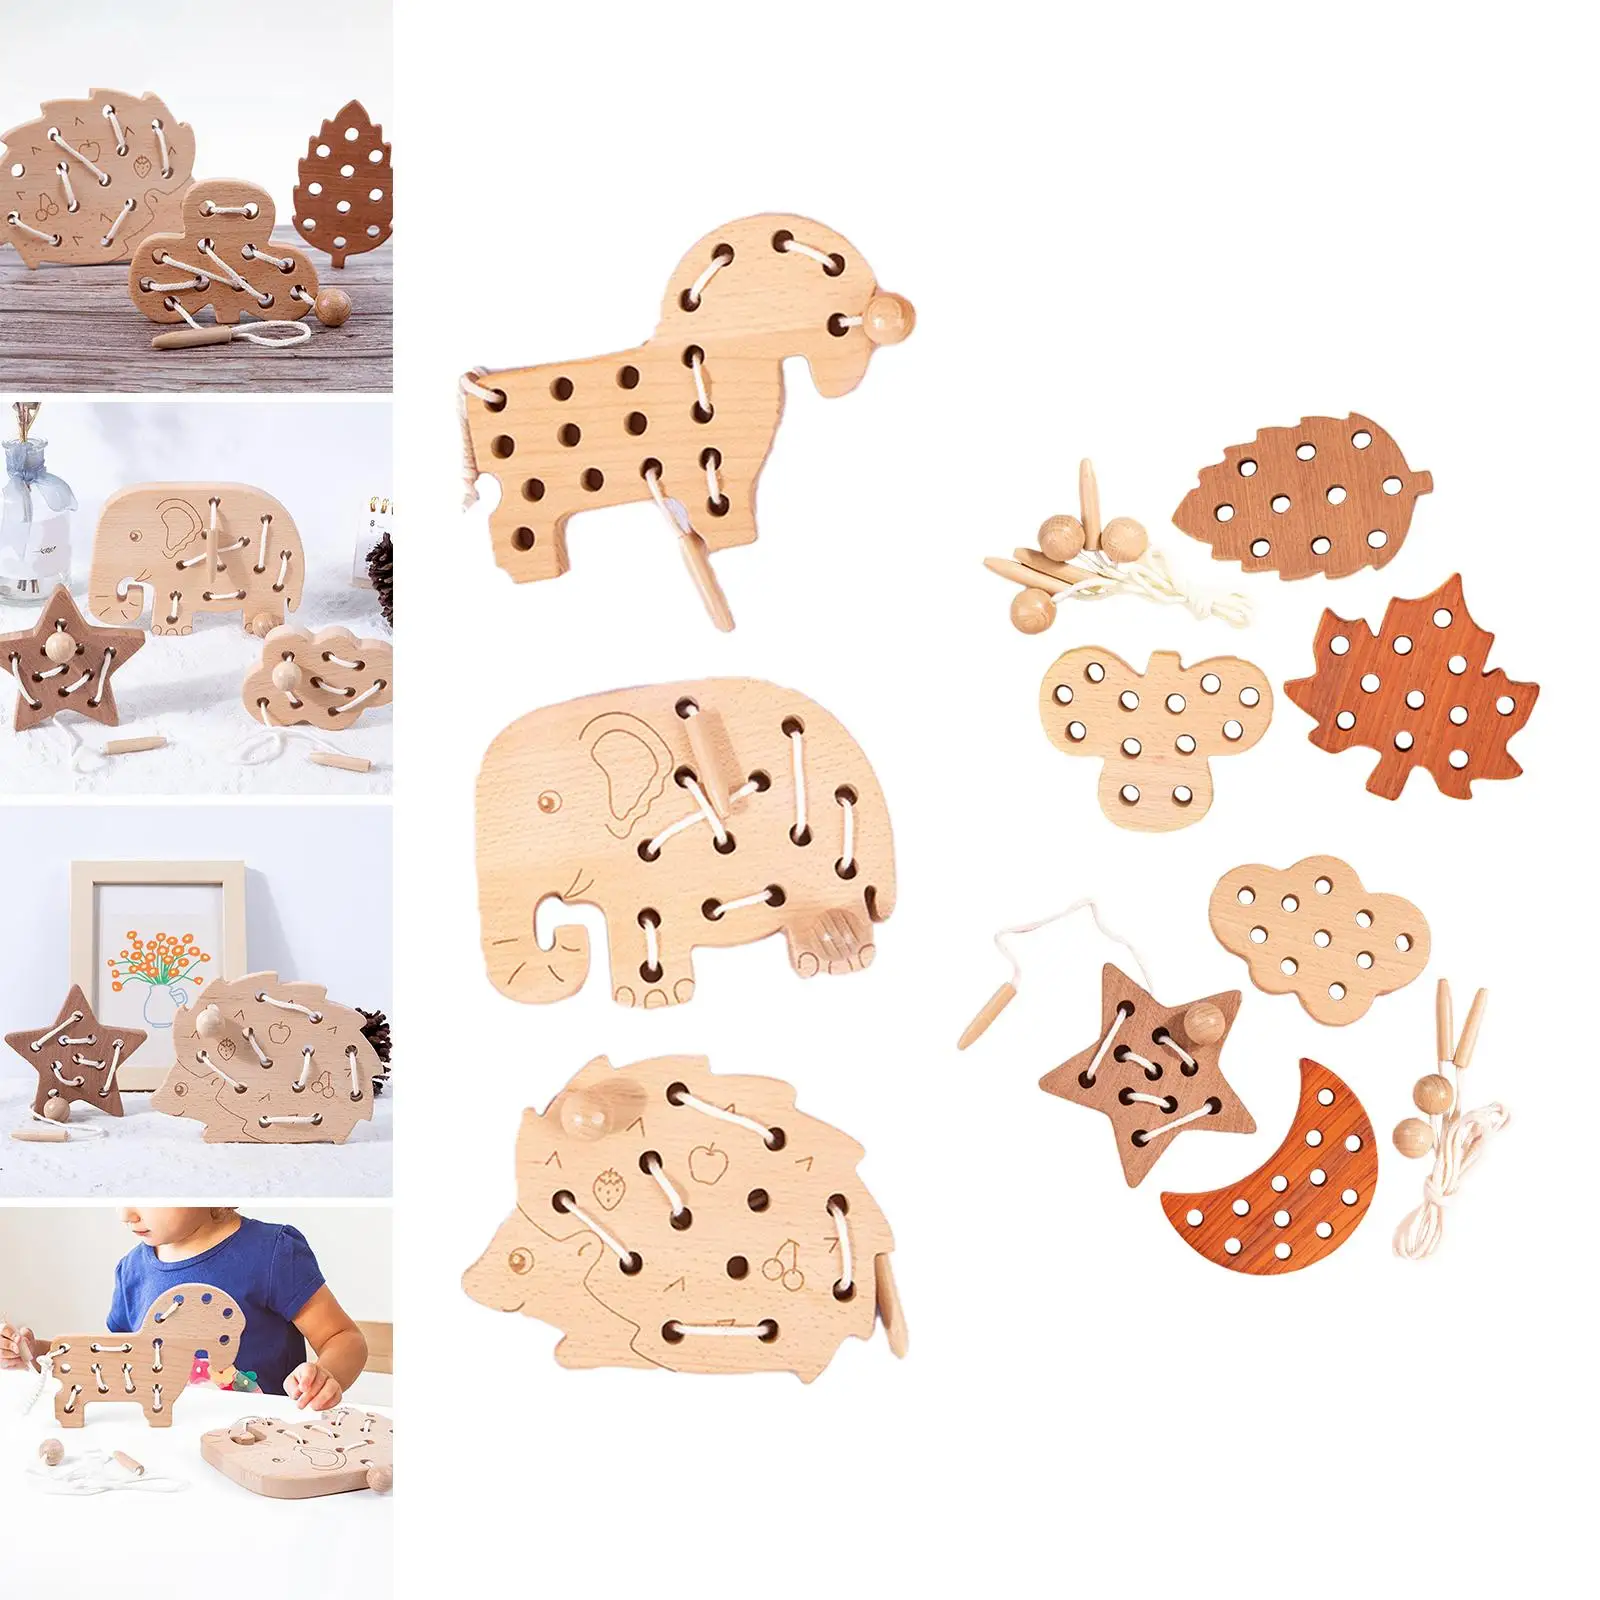 3Pcs Wooden Lacing Threading Toys Activities Board Wood Lace Block Puzzle for Car